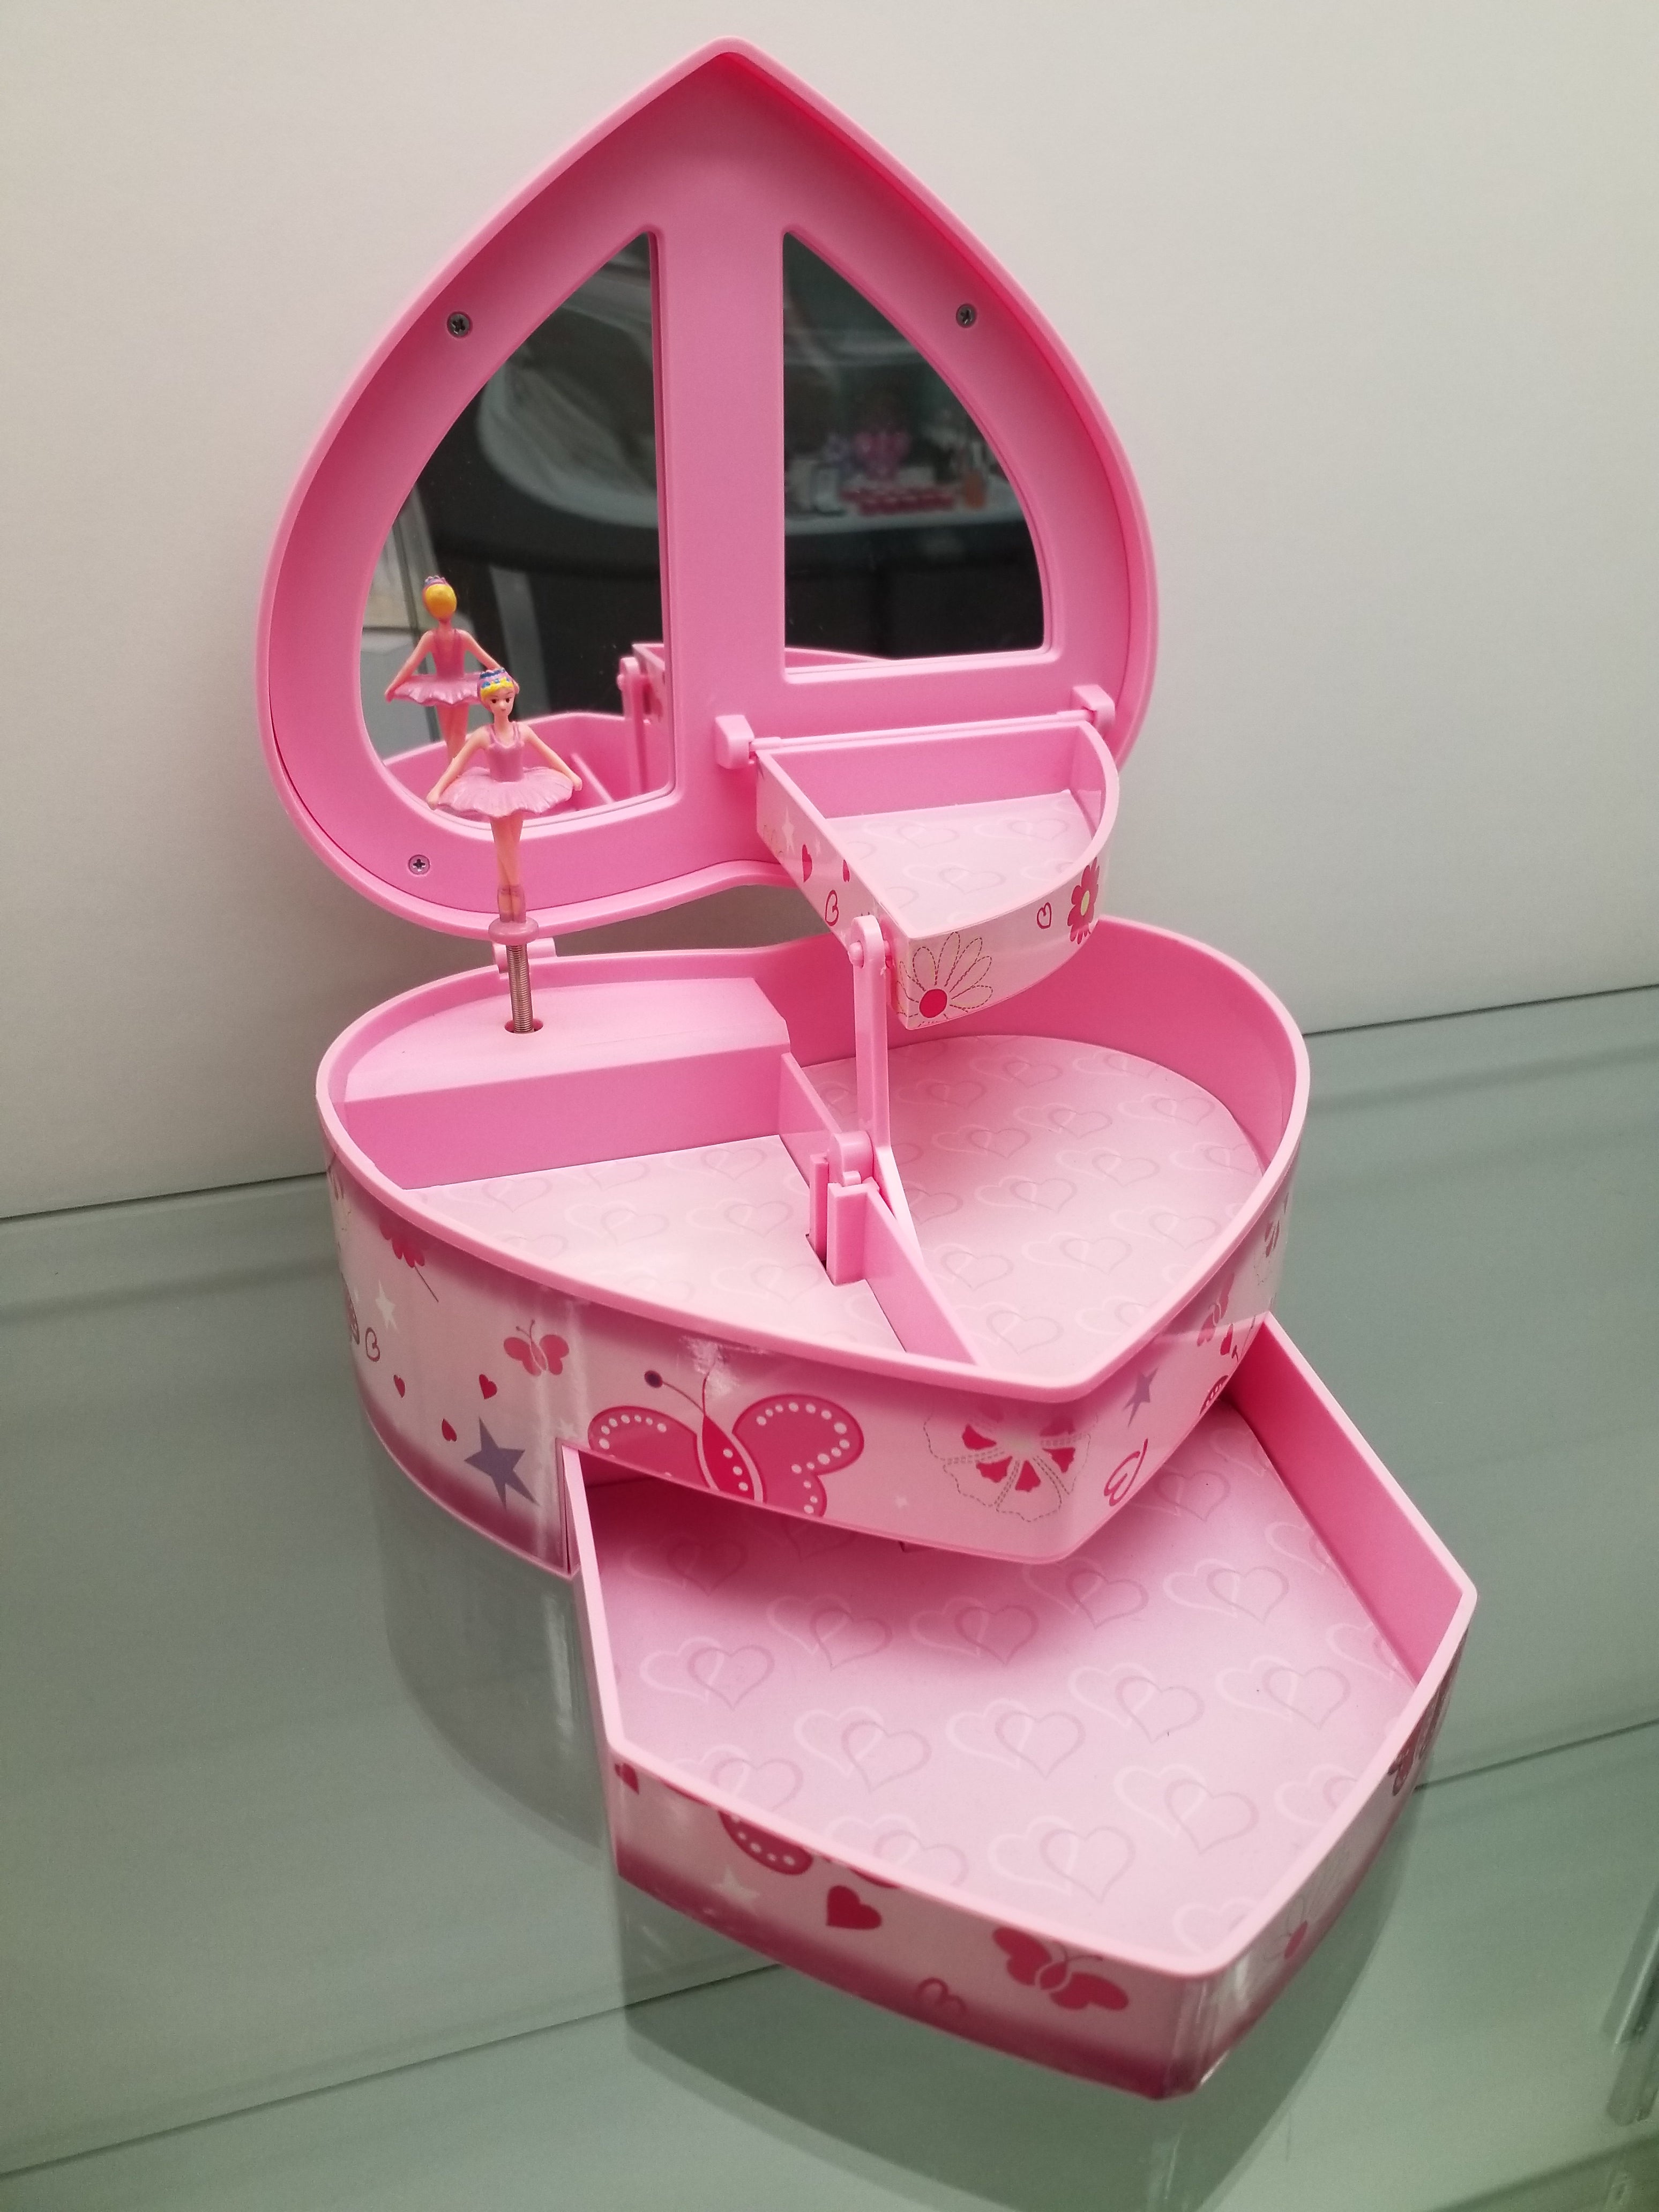 Heart Shaped Children's Jewellery Box - Musical with Spinning Ballerina